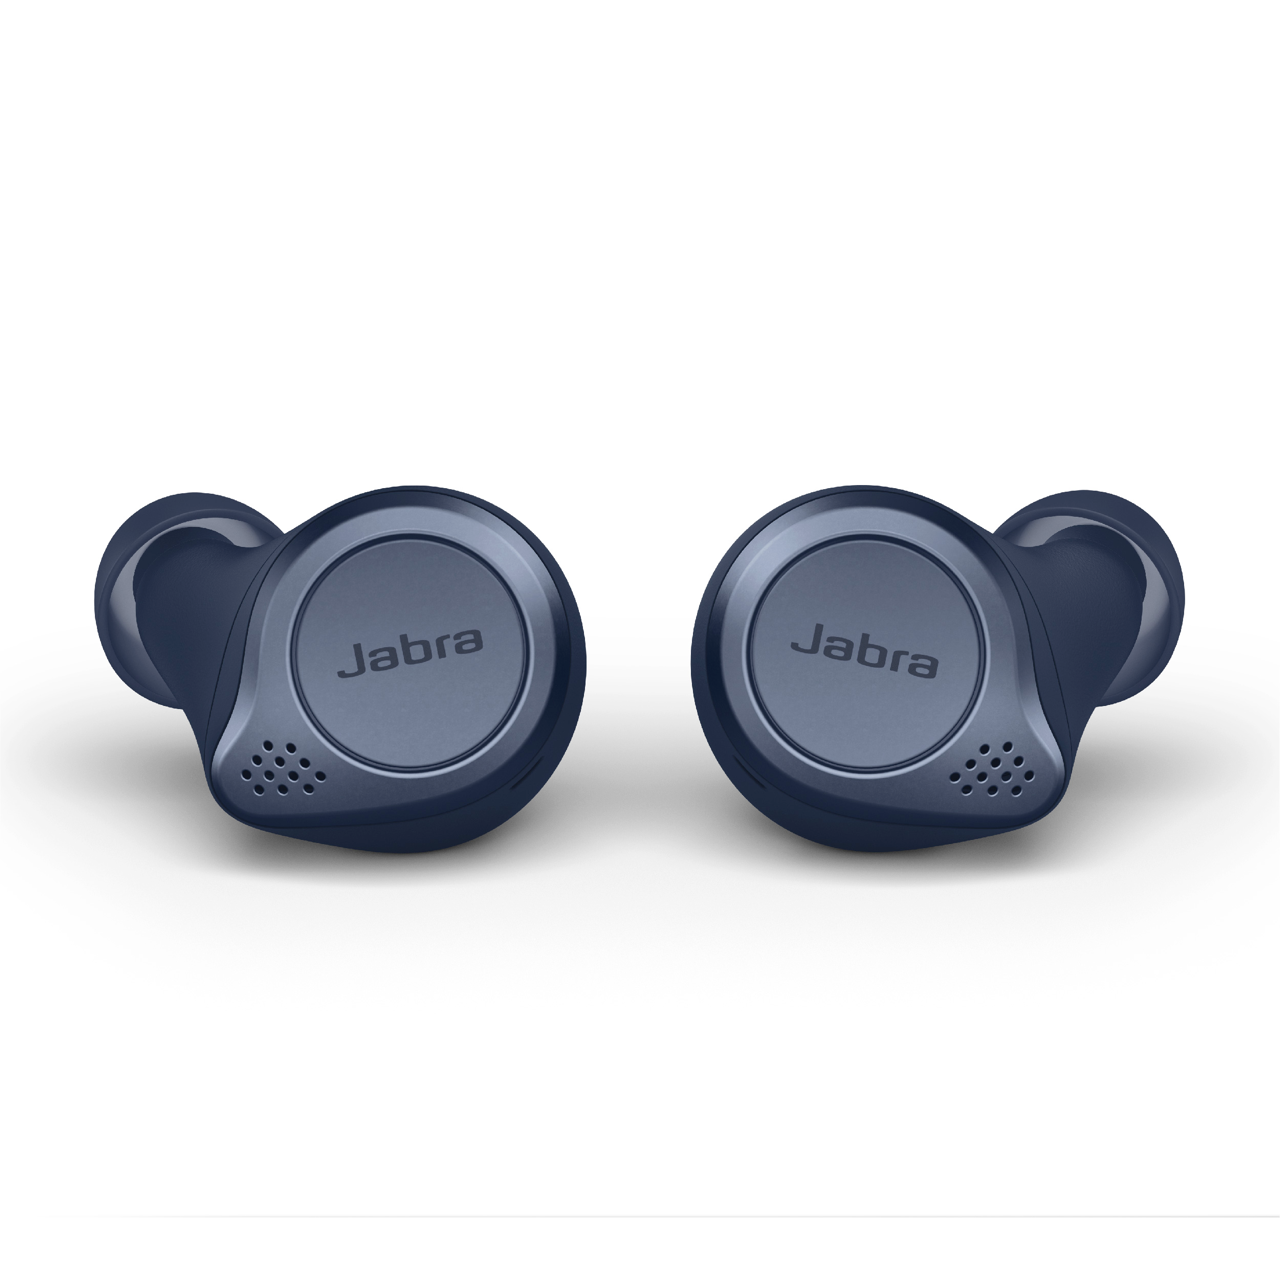 Jabra Elite Active 75t True Wireless Earbuds, Noise Cancelling, Navy - image 1 of 7